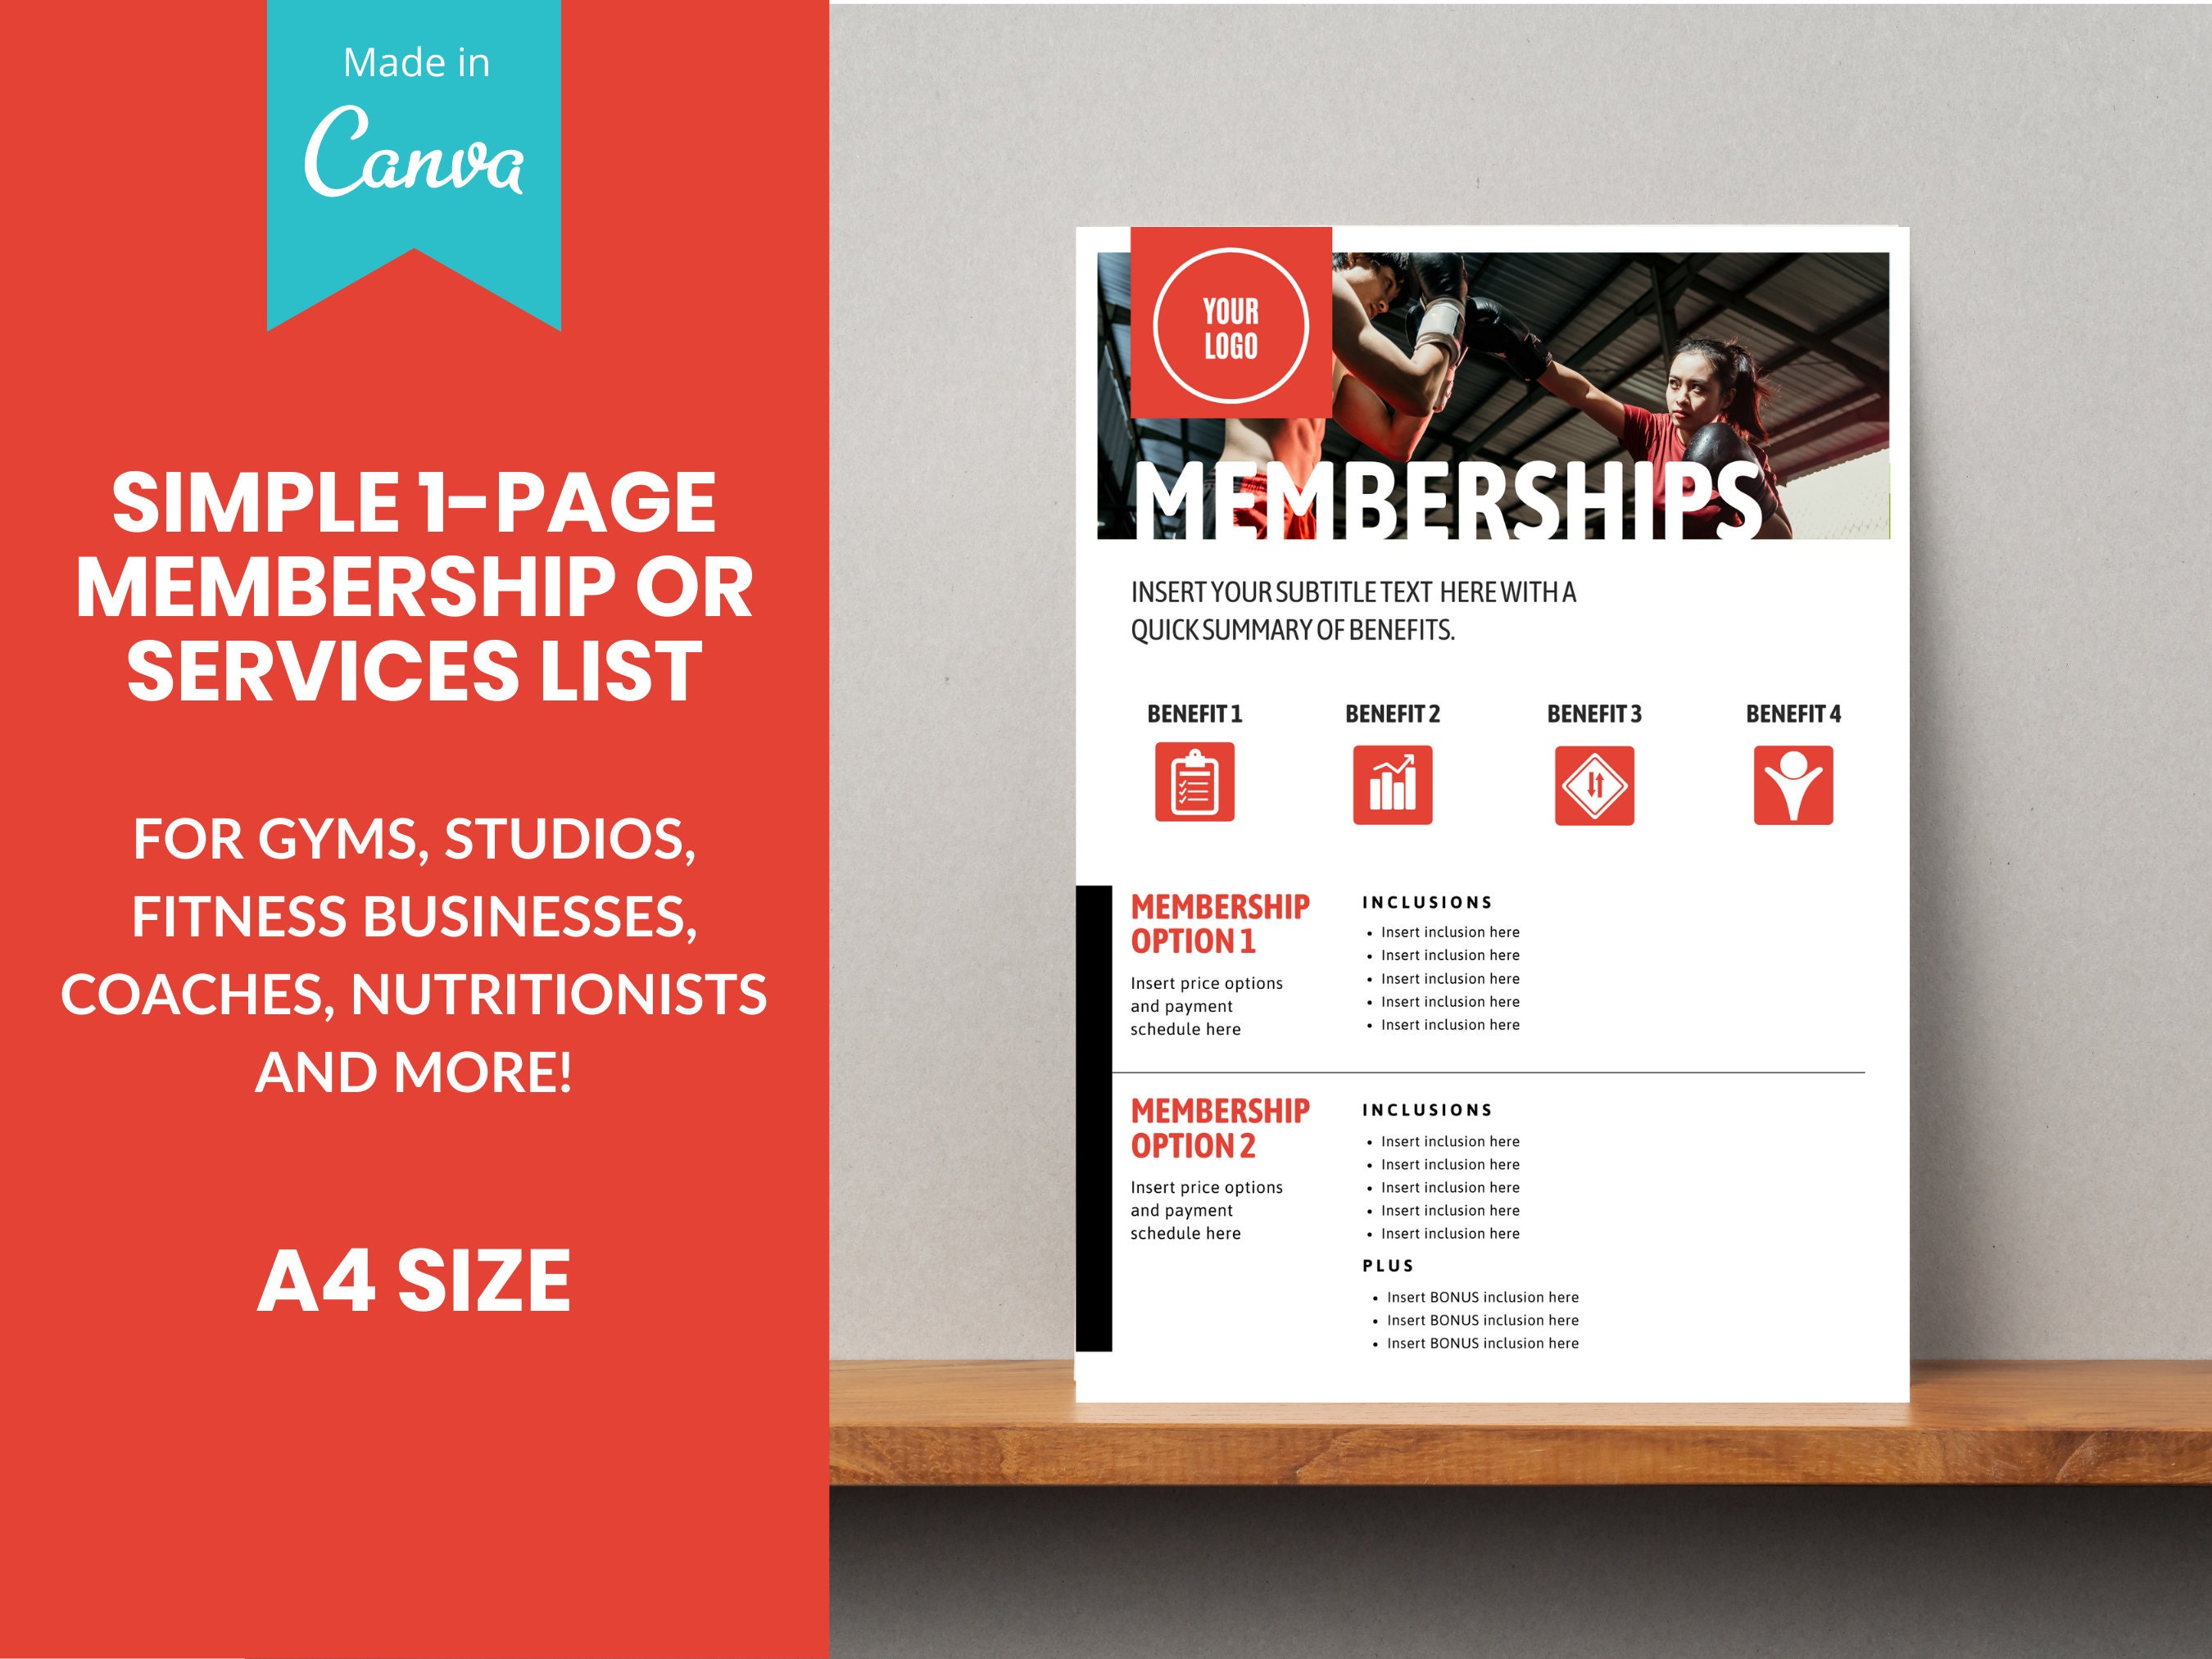 Simple Membership Price List, Services List Canva Templates for Gyms,  Crossfit Gym, Coaches, Yoga, Studio Fitness Business 